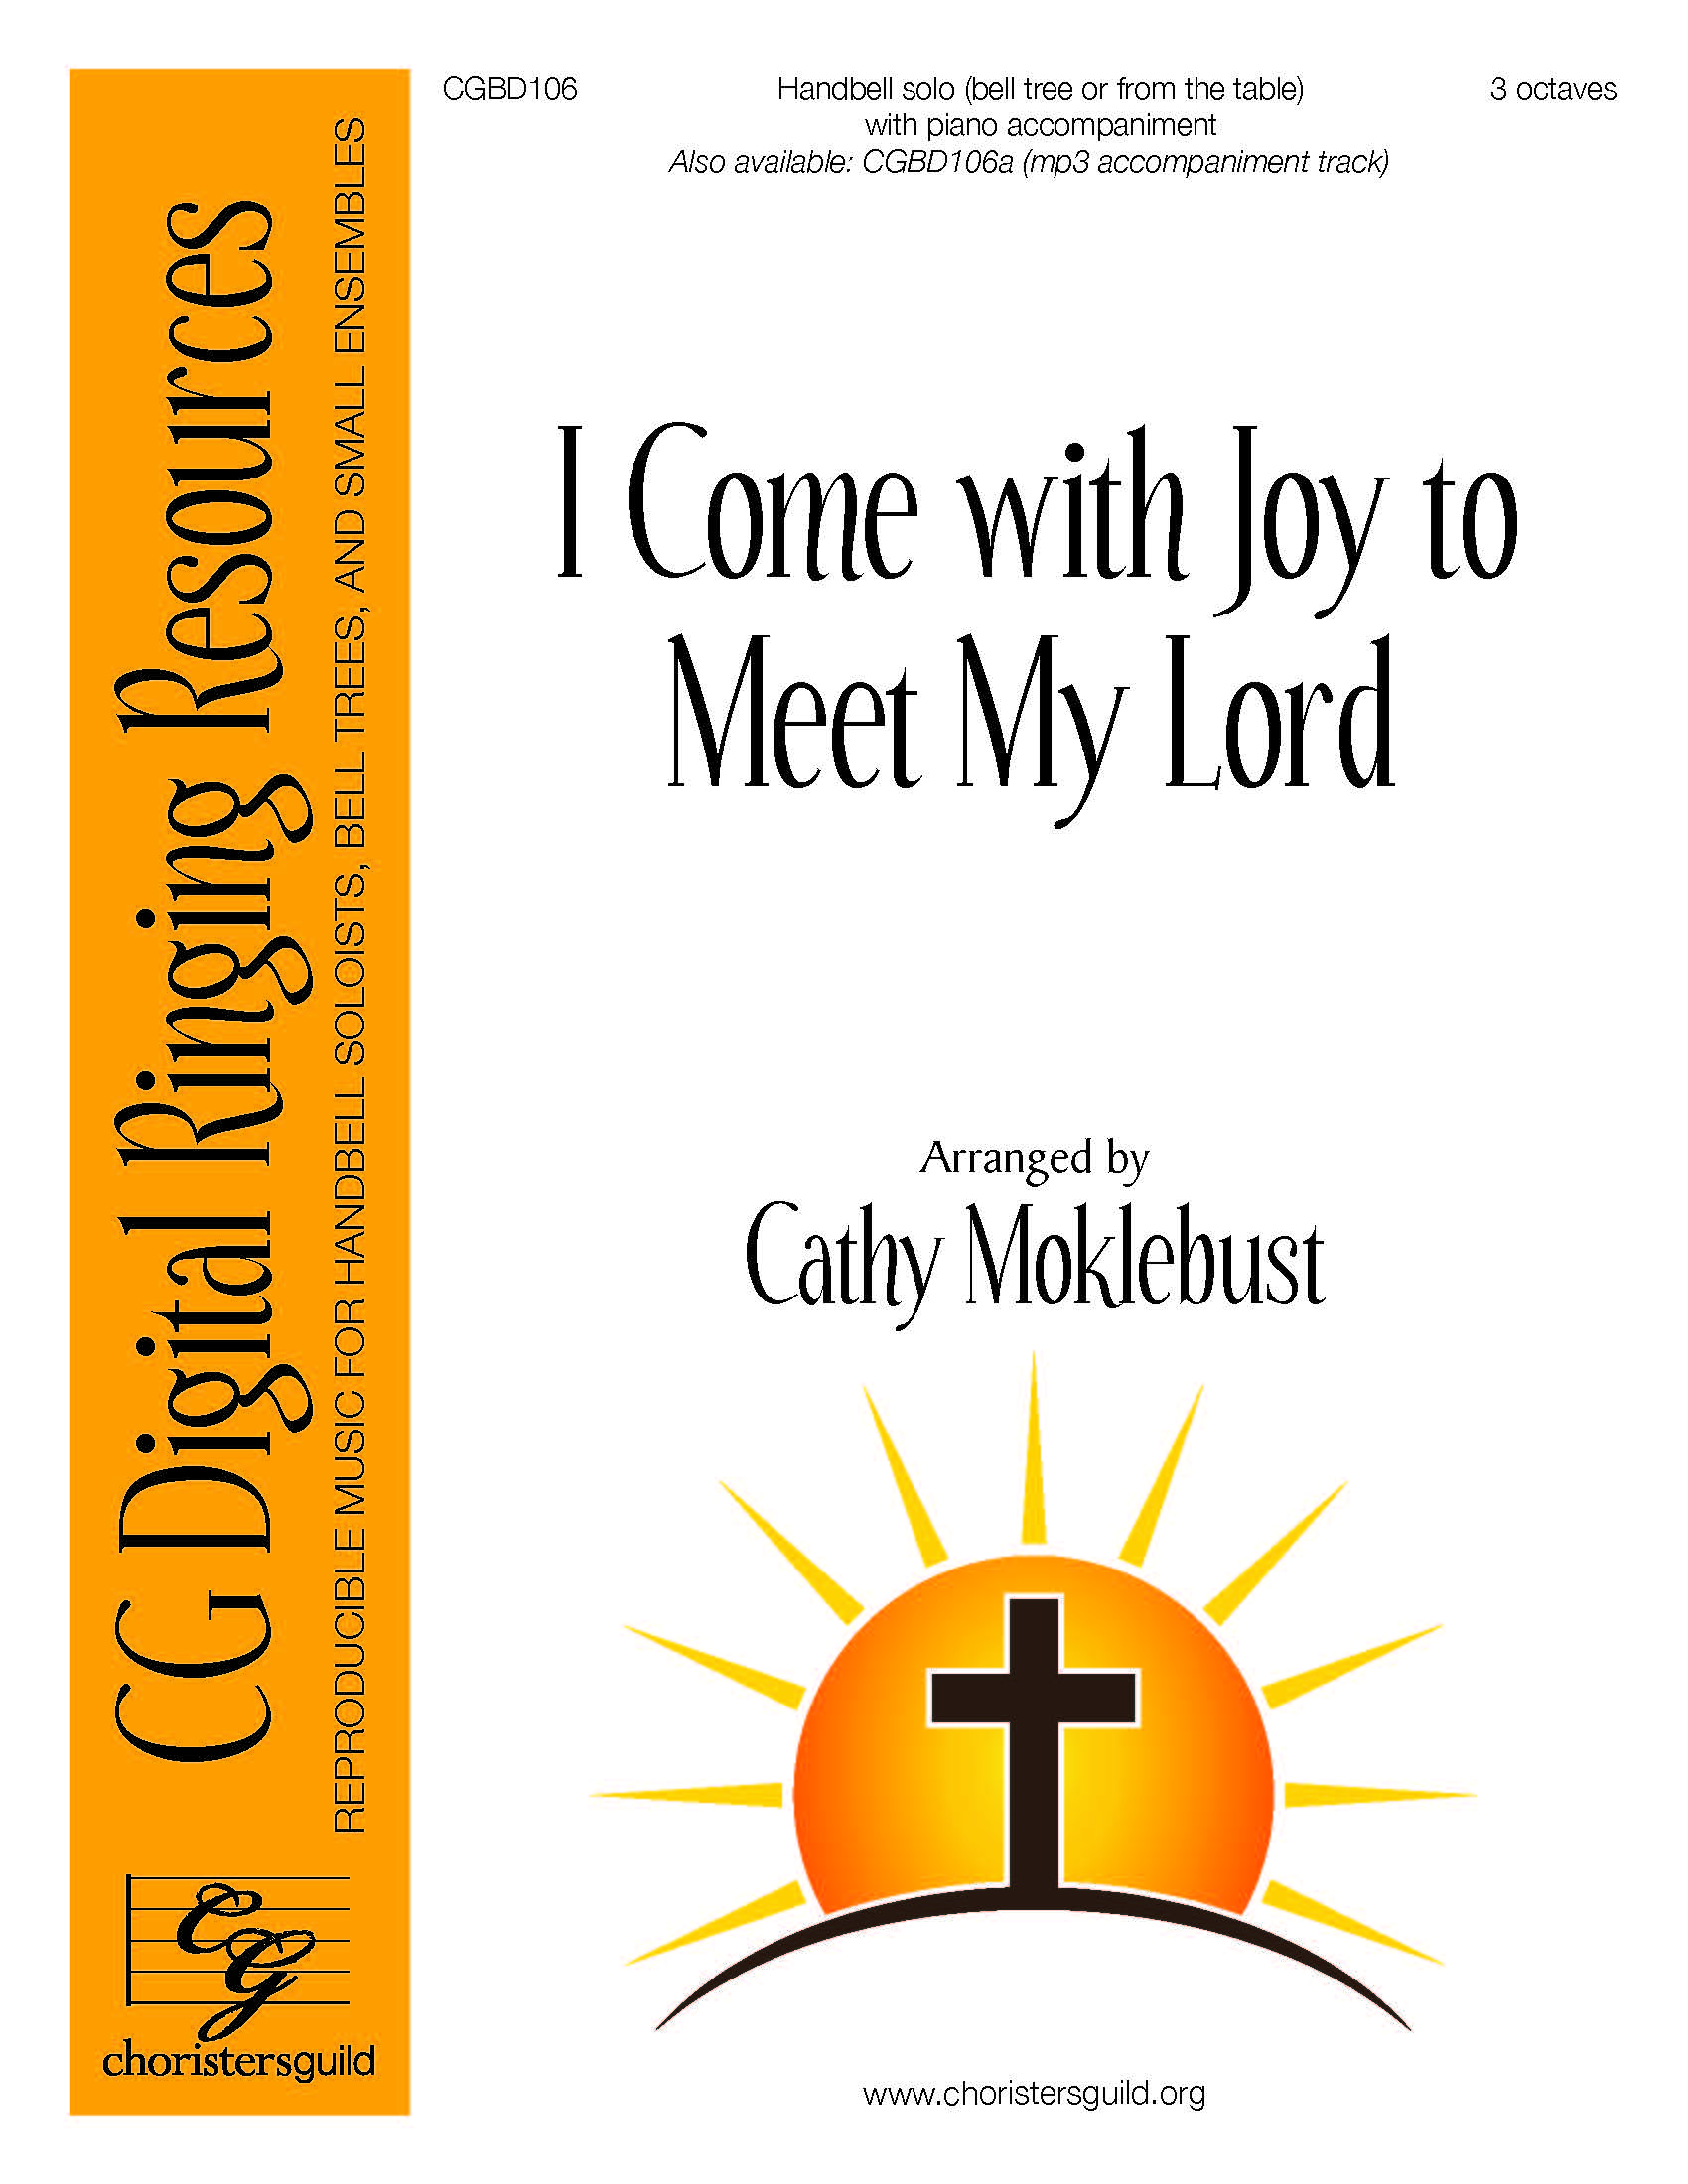 I Come with Joy to Meet My Lord - Digital Accompaniment Track